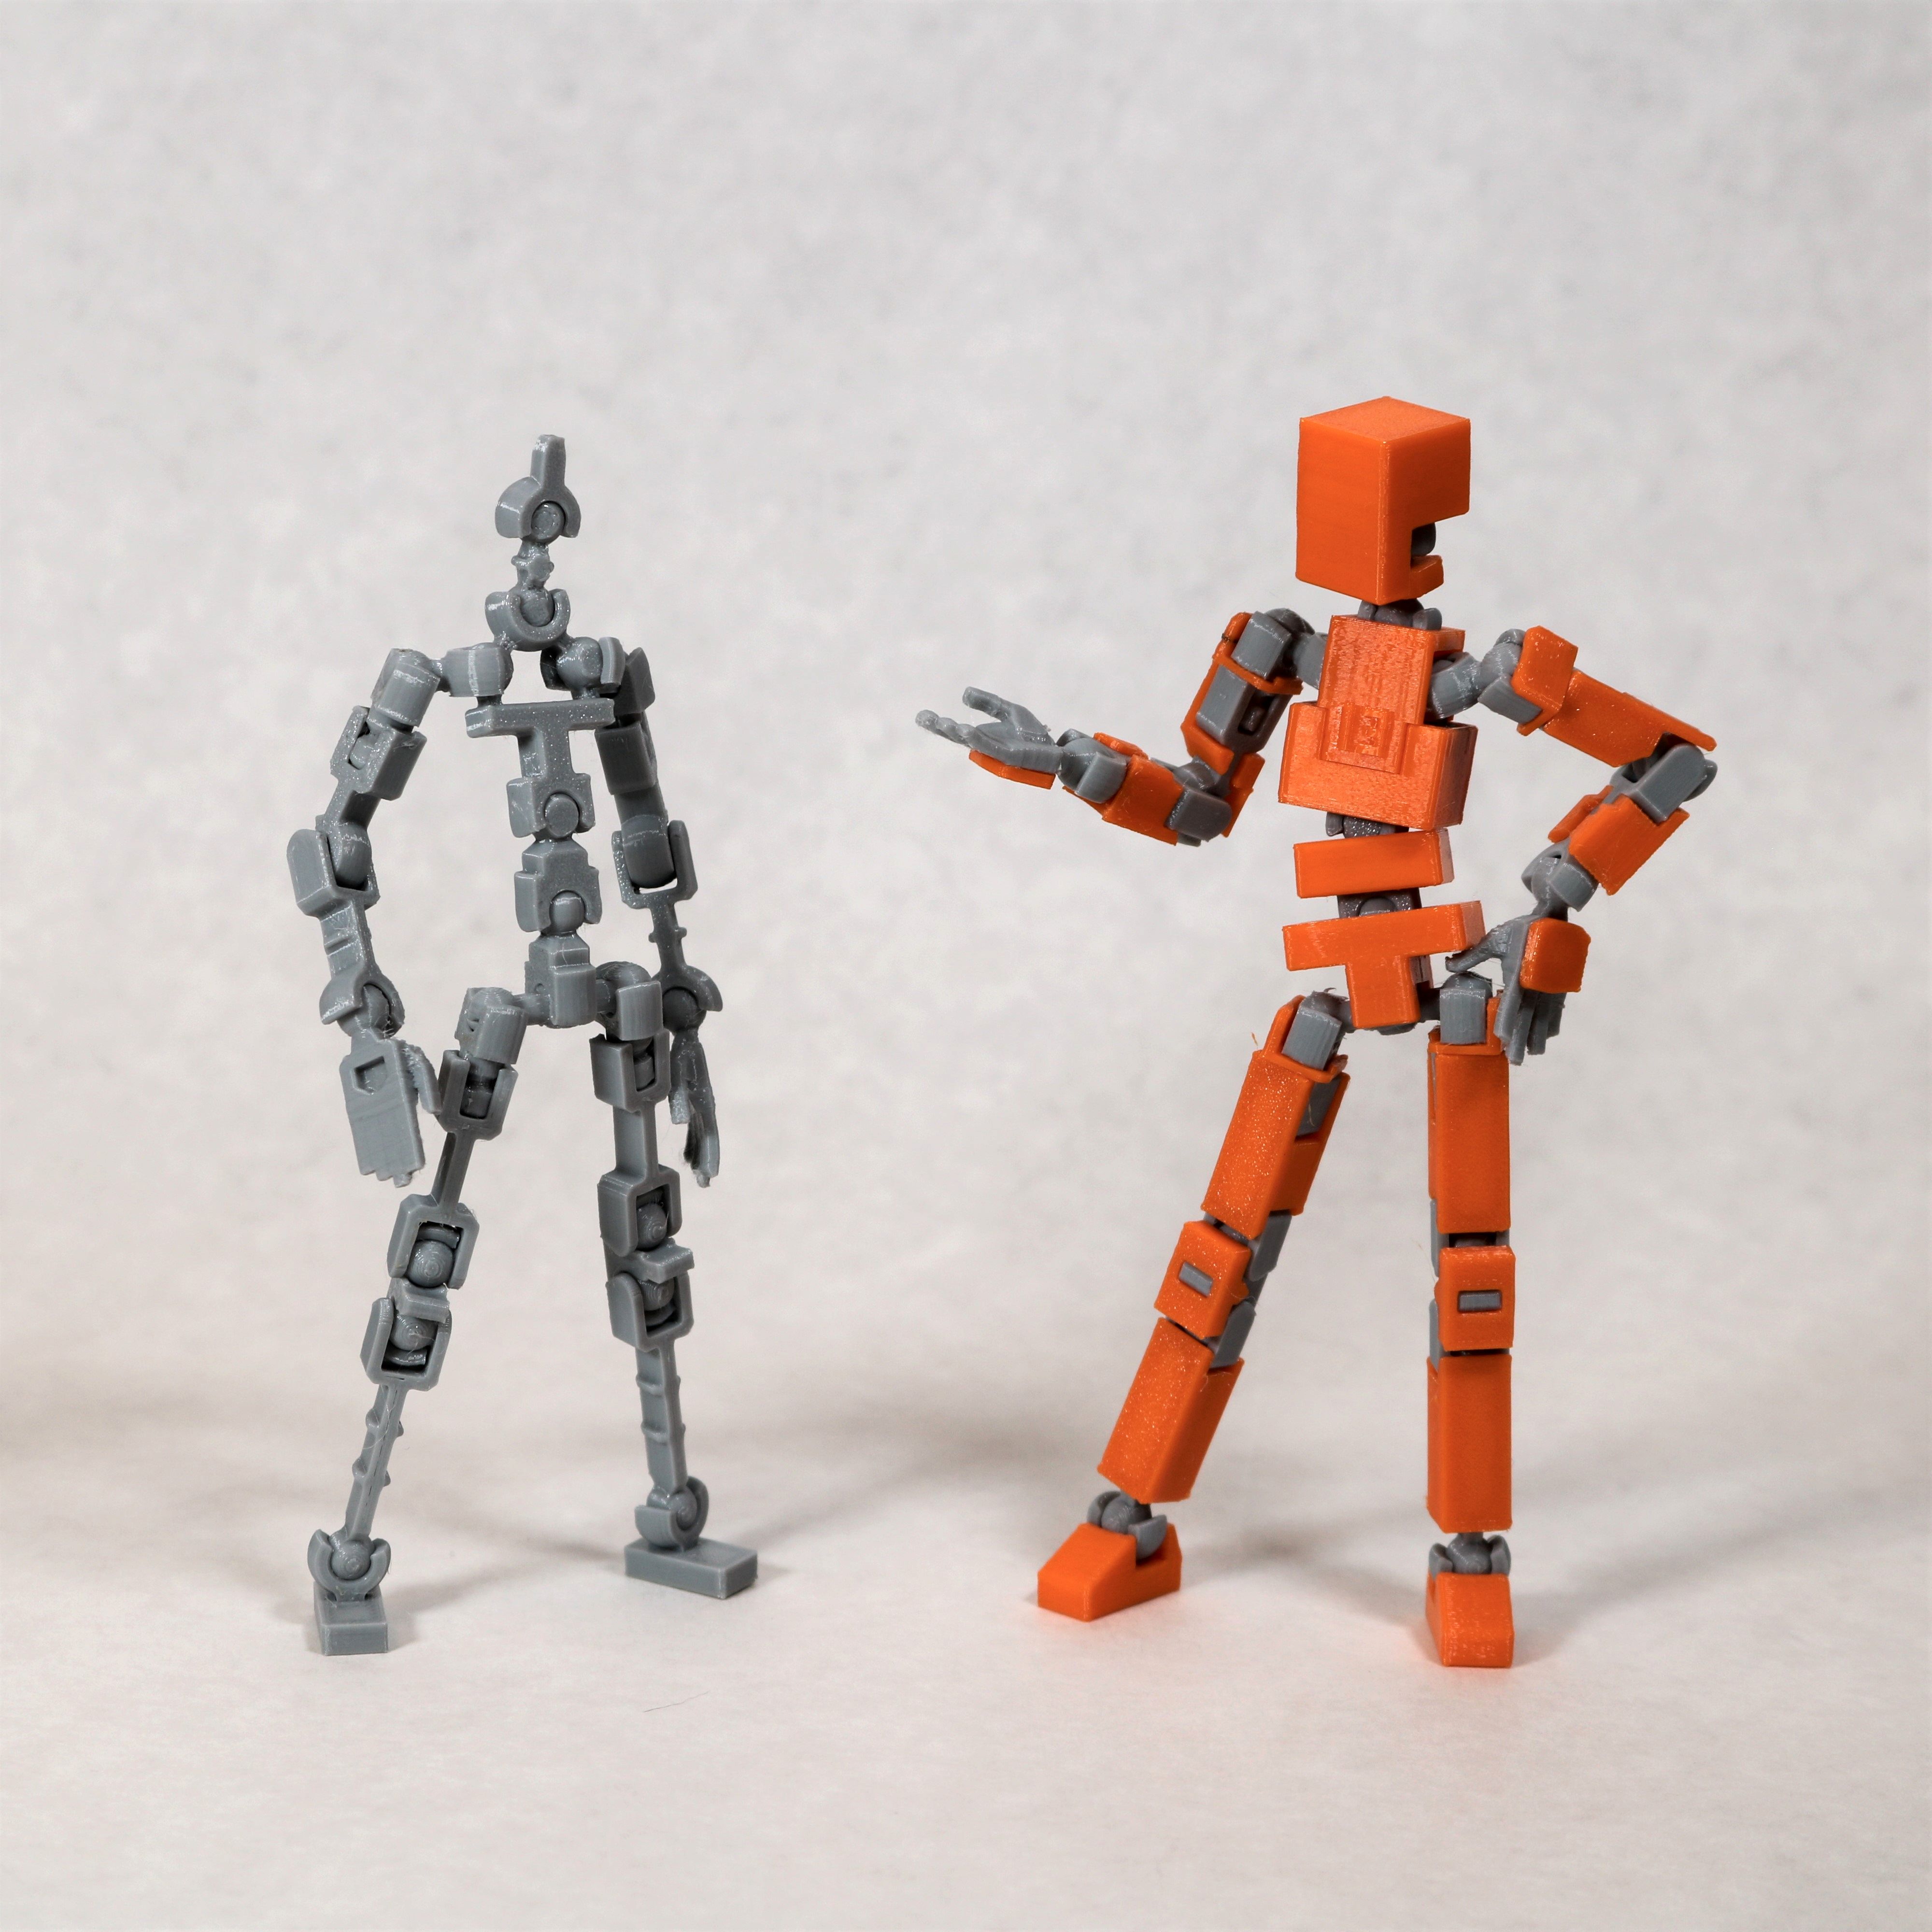 LUCKY 13 Printable Jointed Figure by soozafone Download free STL